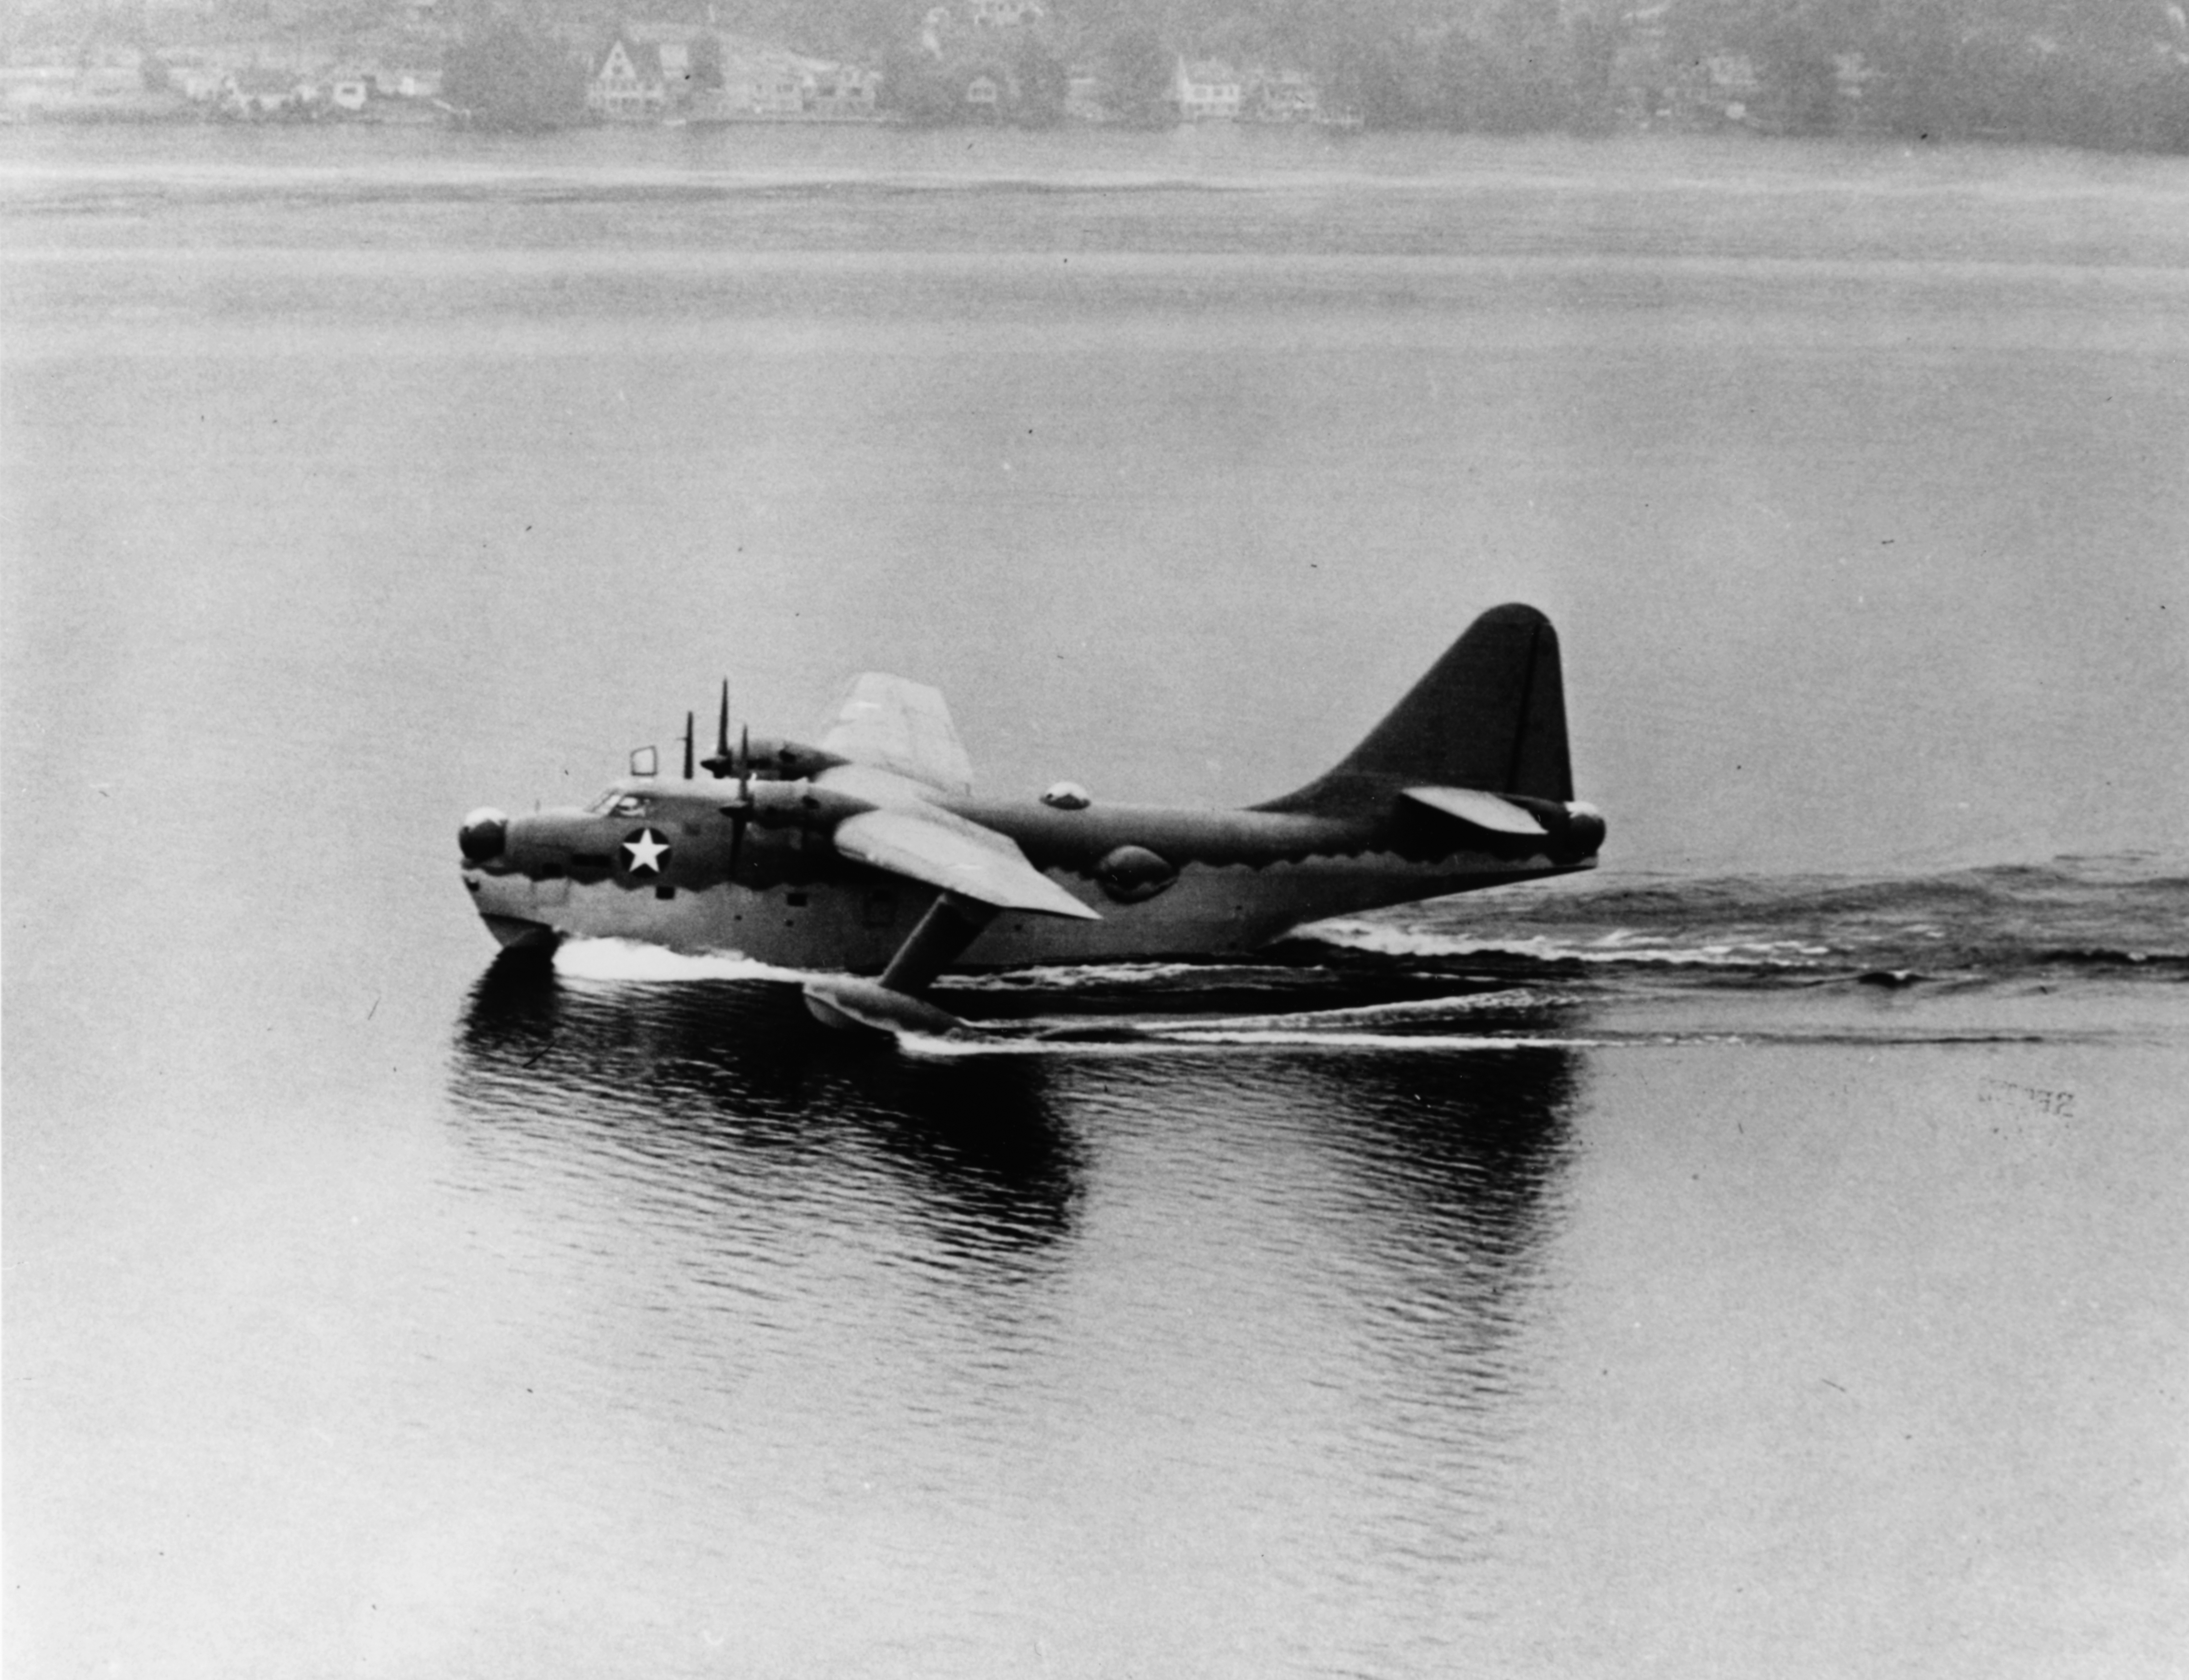 XPBB-1 in the water, Seattle